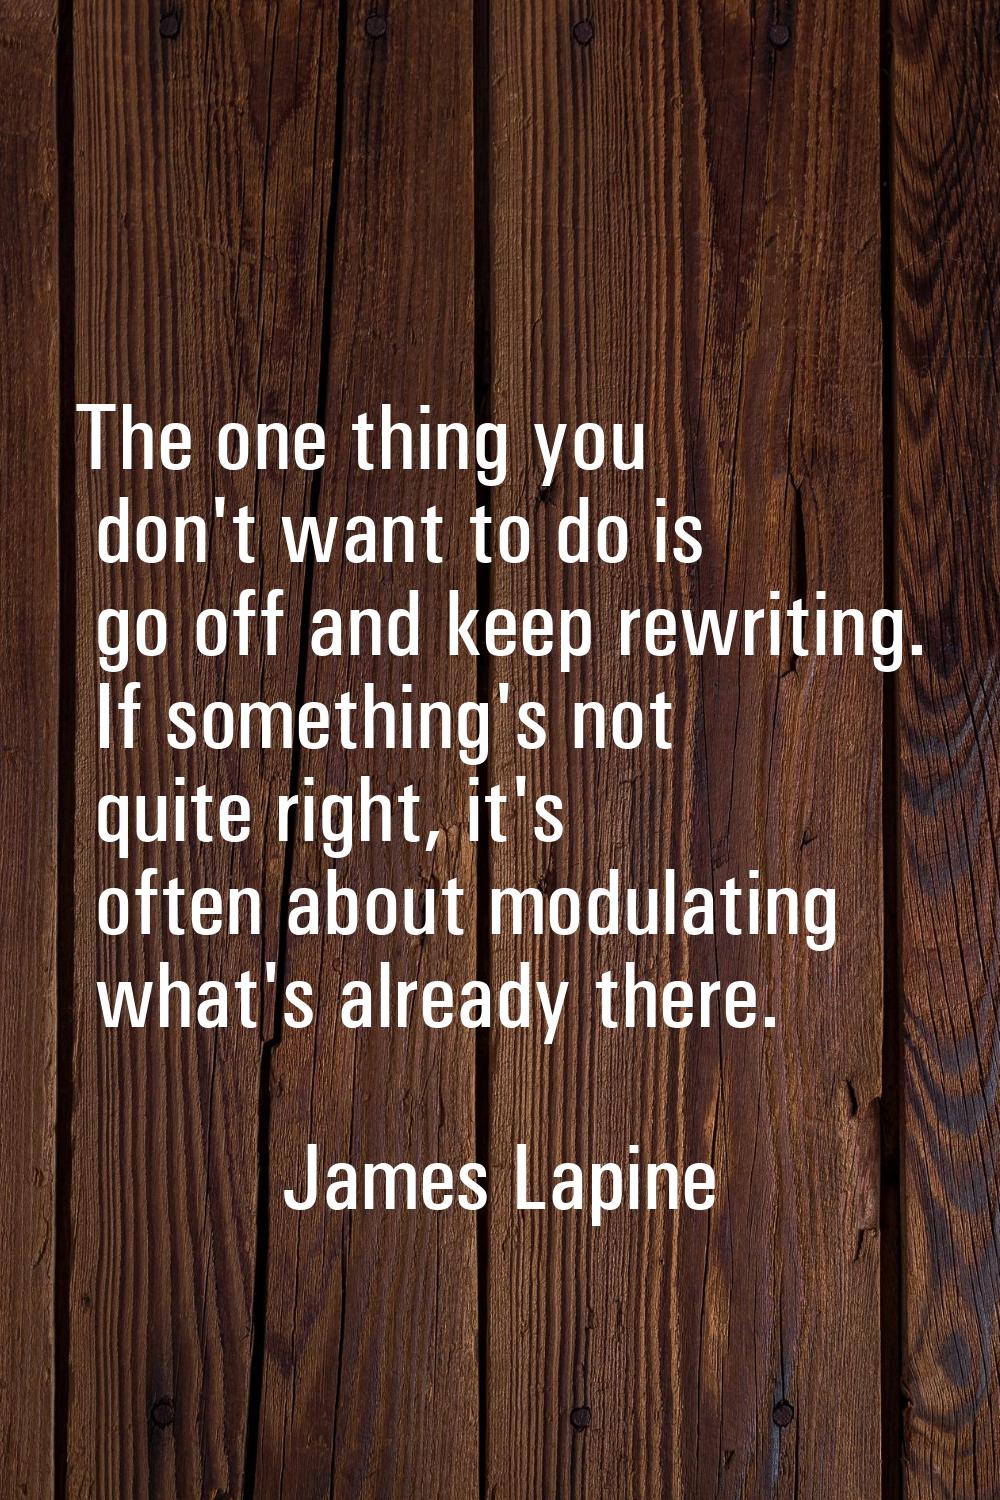 The one thing you don't want to do is go off and keep rewriting. If something's not quite right, it